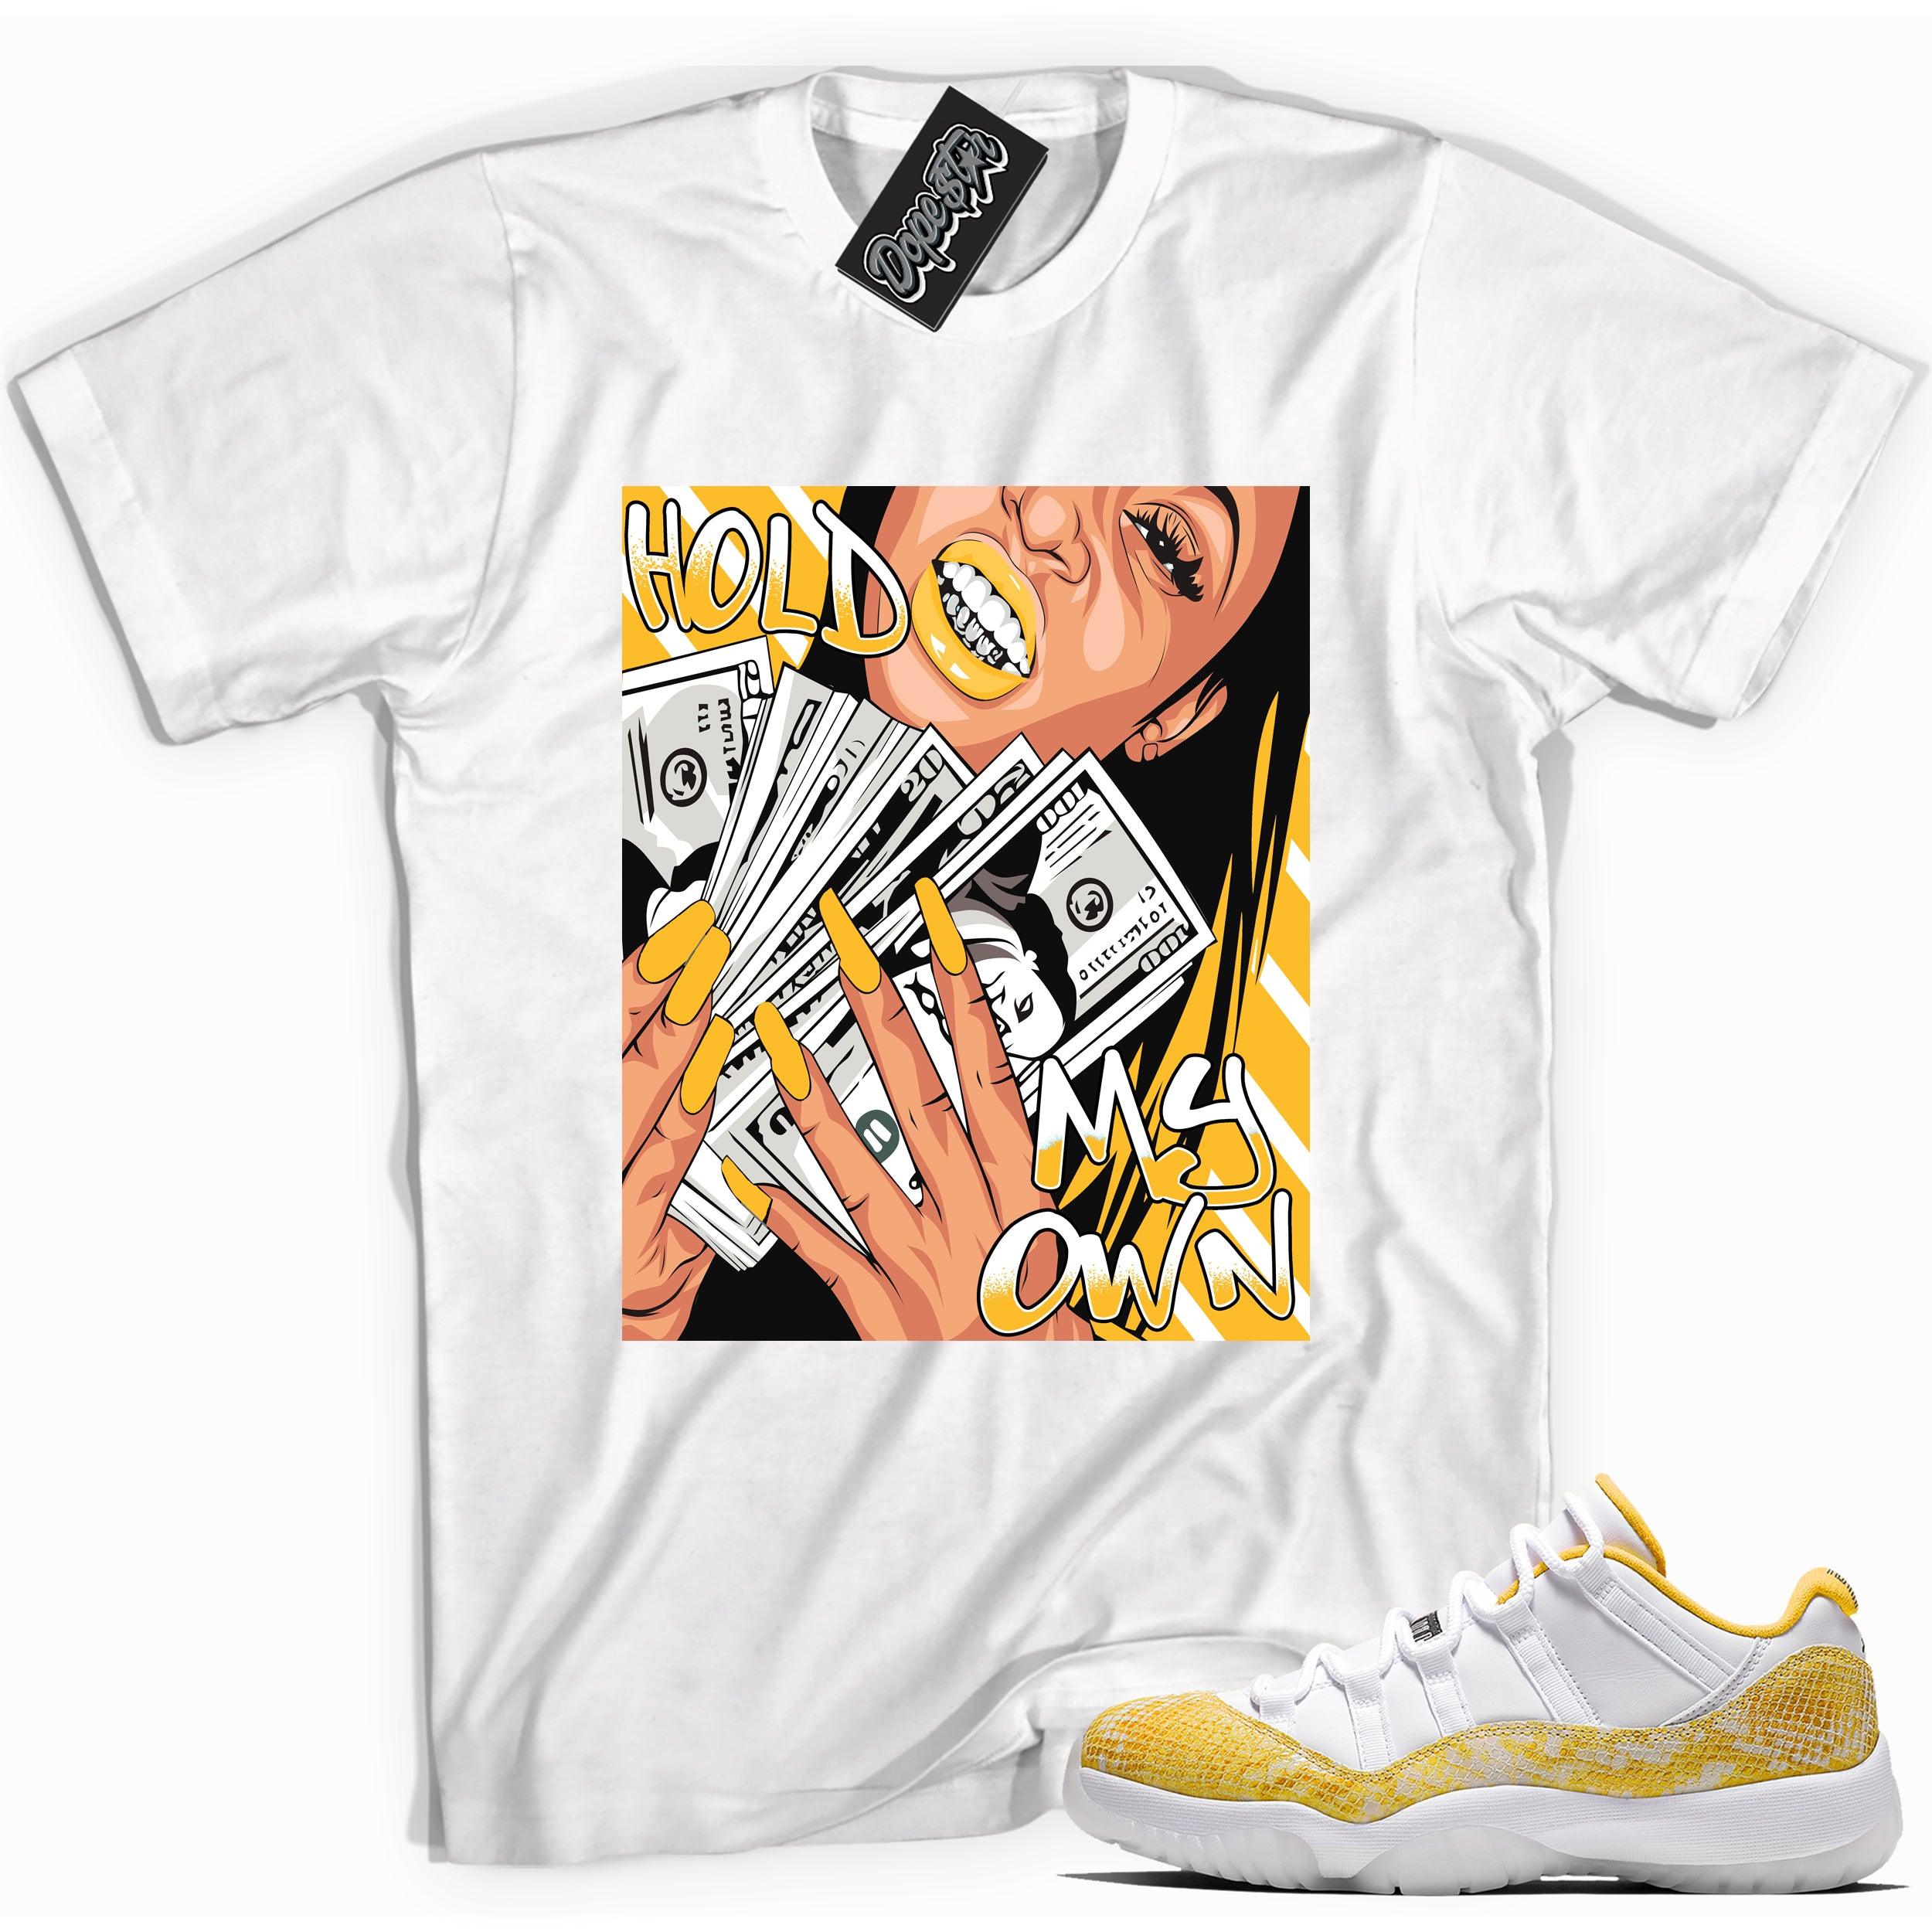 Cool white graphic tee with 'hold my own' print, that perfectly matches Air Jordan 11 Low Yellow Snakeskin sneakers